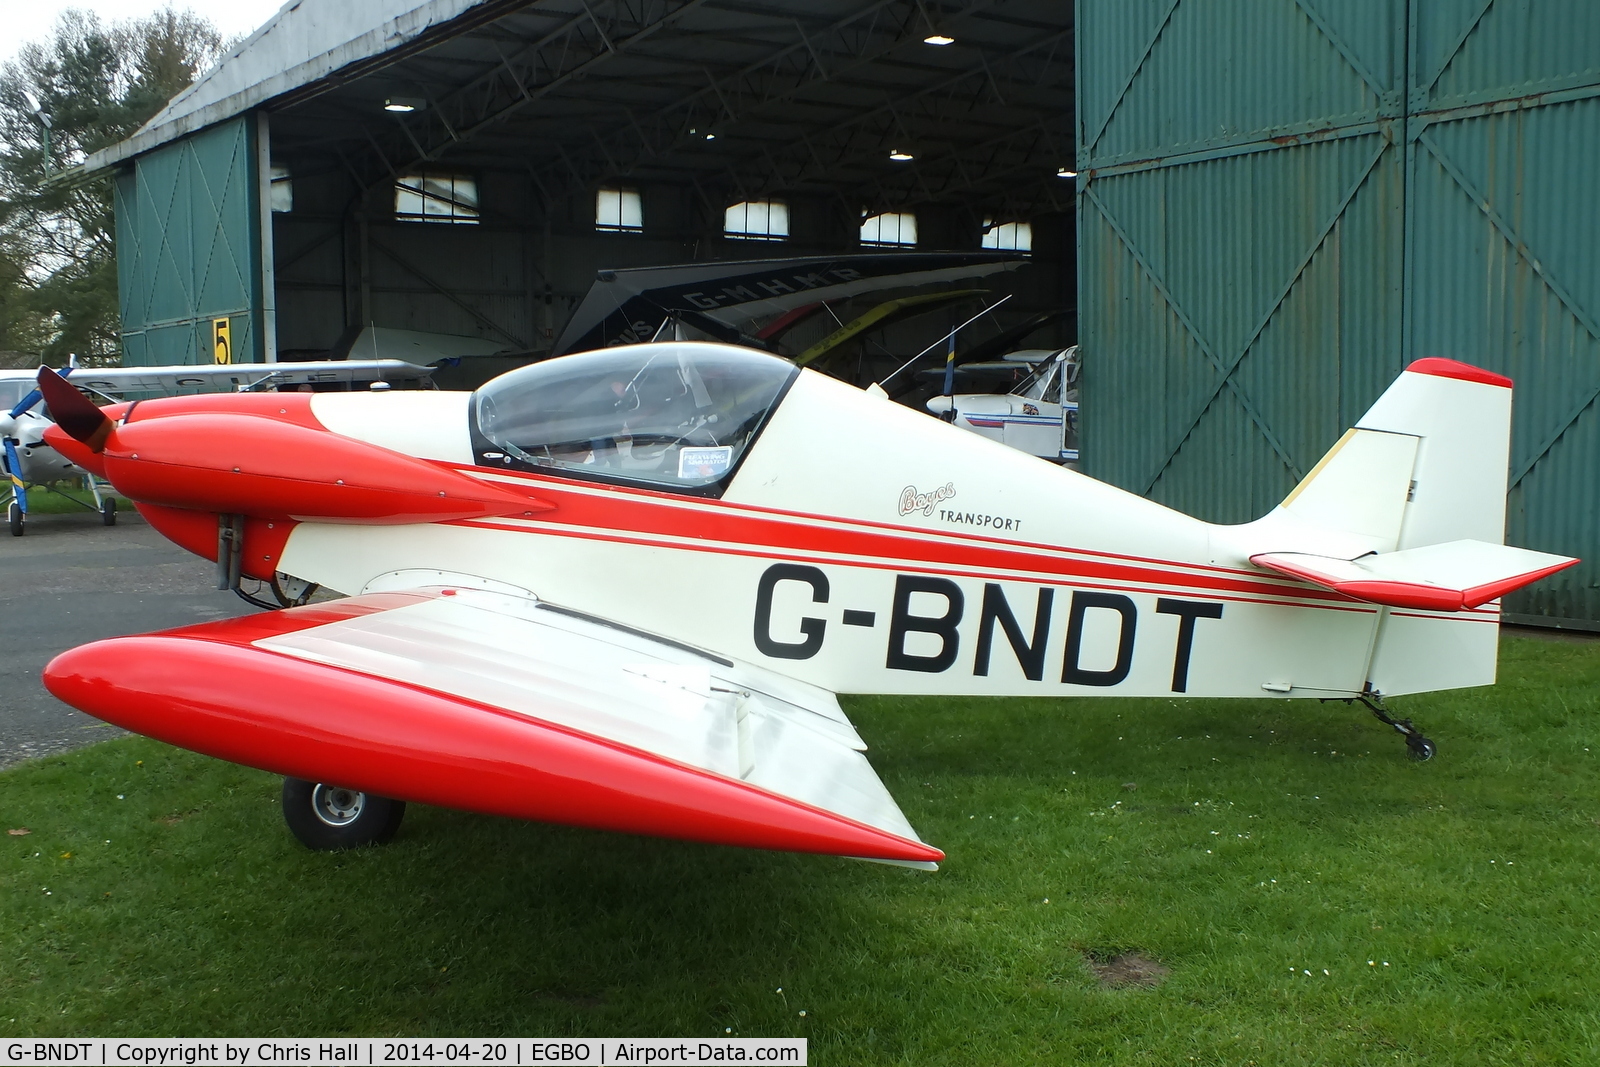 G-BNDT, 1987 Brugger MB-2 Colibri C/N PFA 043-10981, at the Wings and Wheels fly in